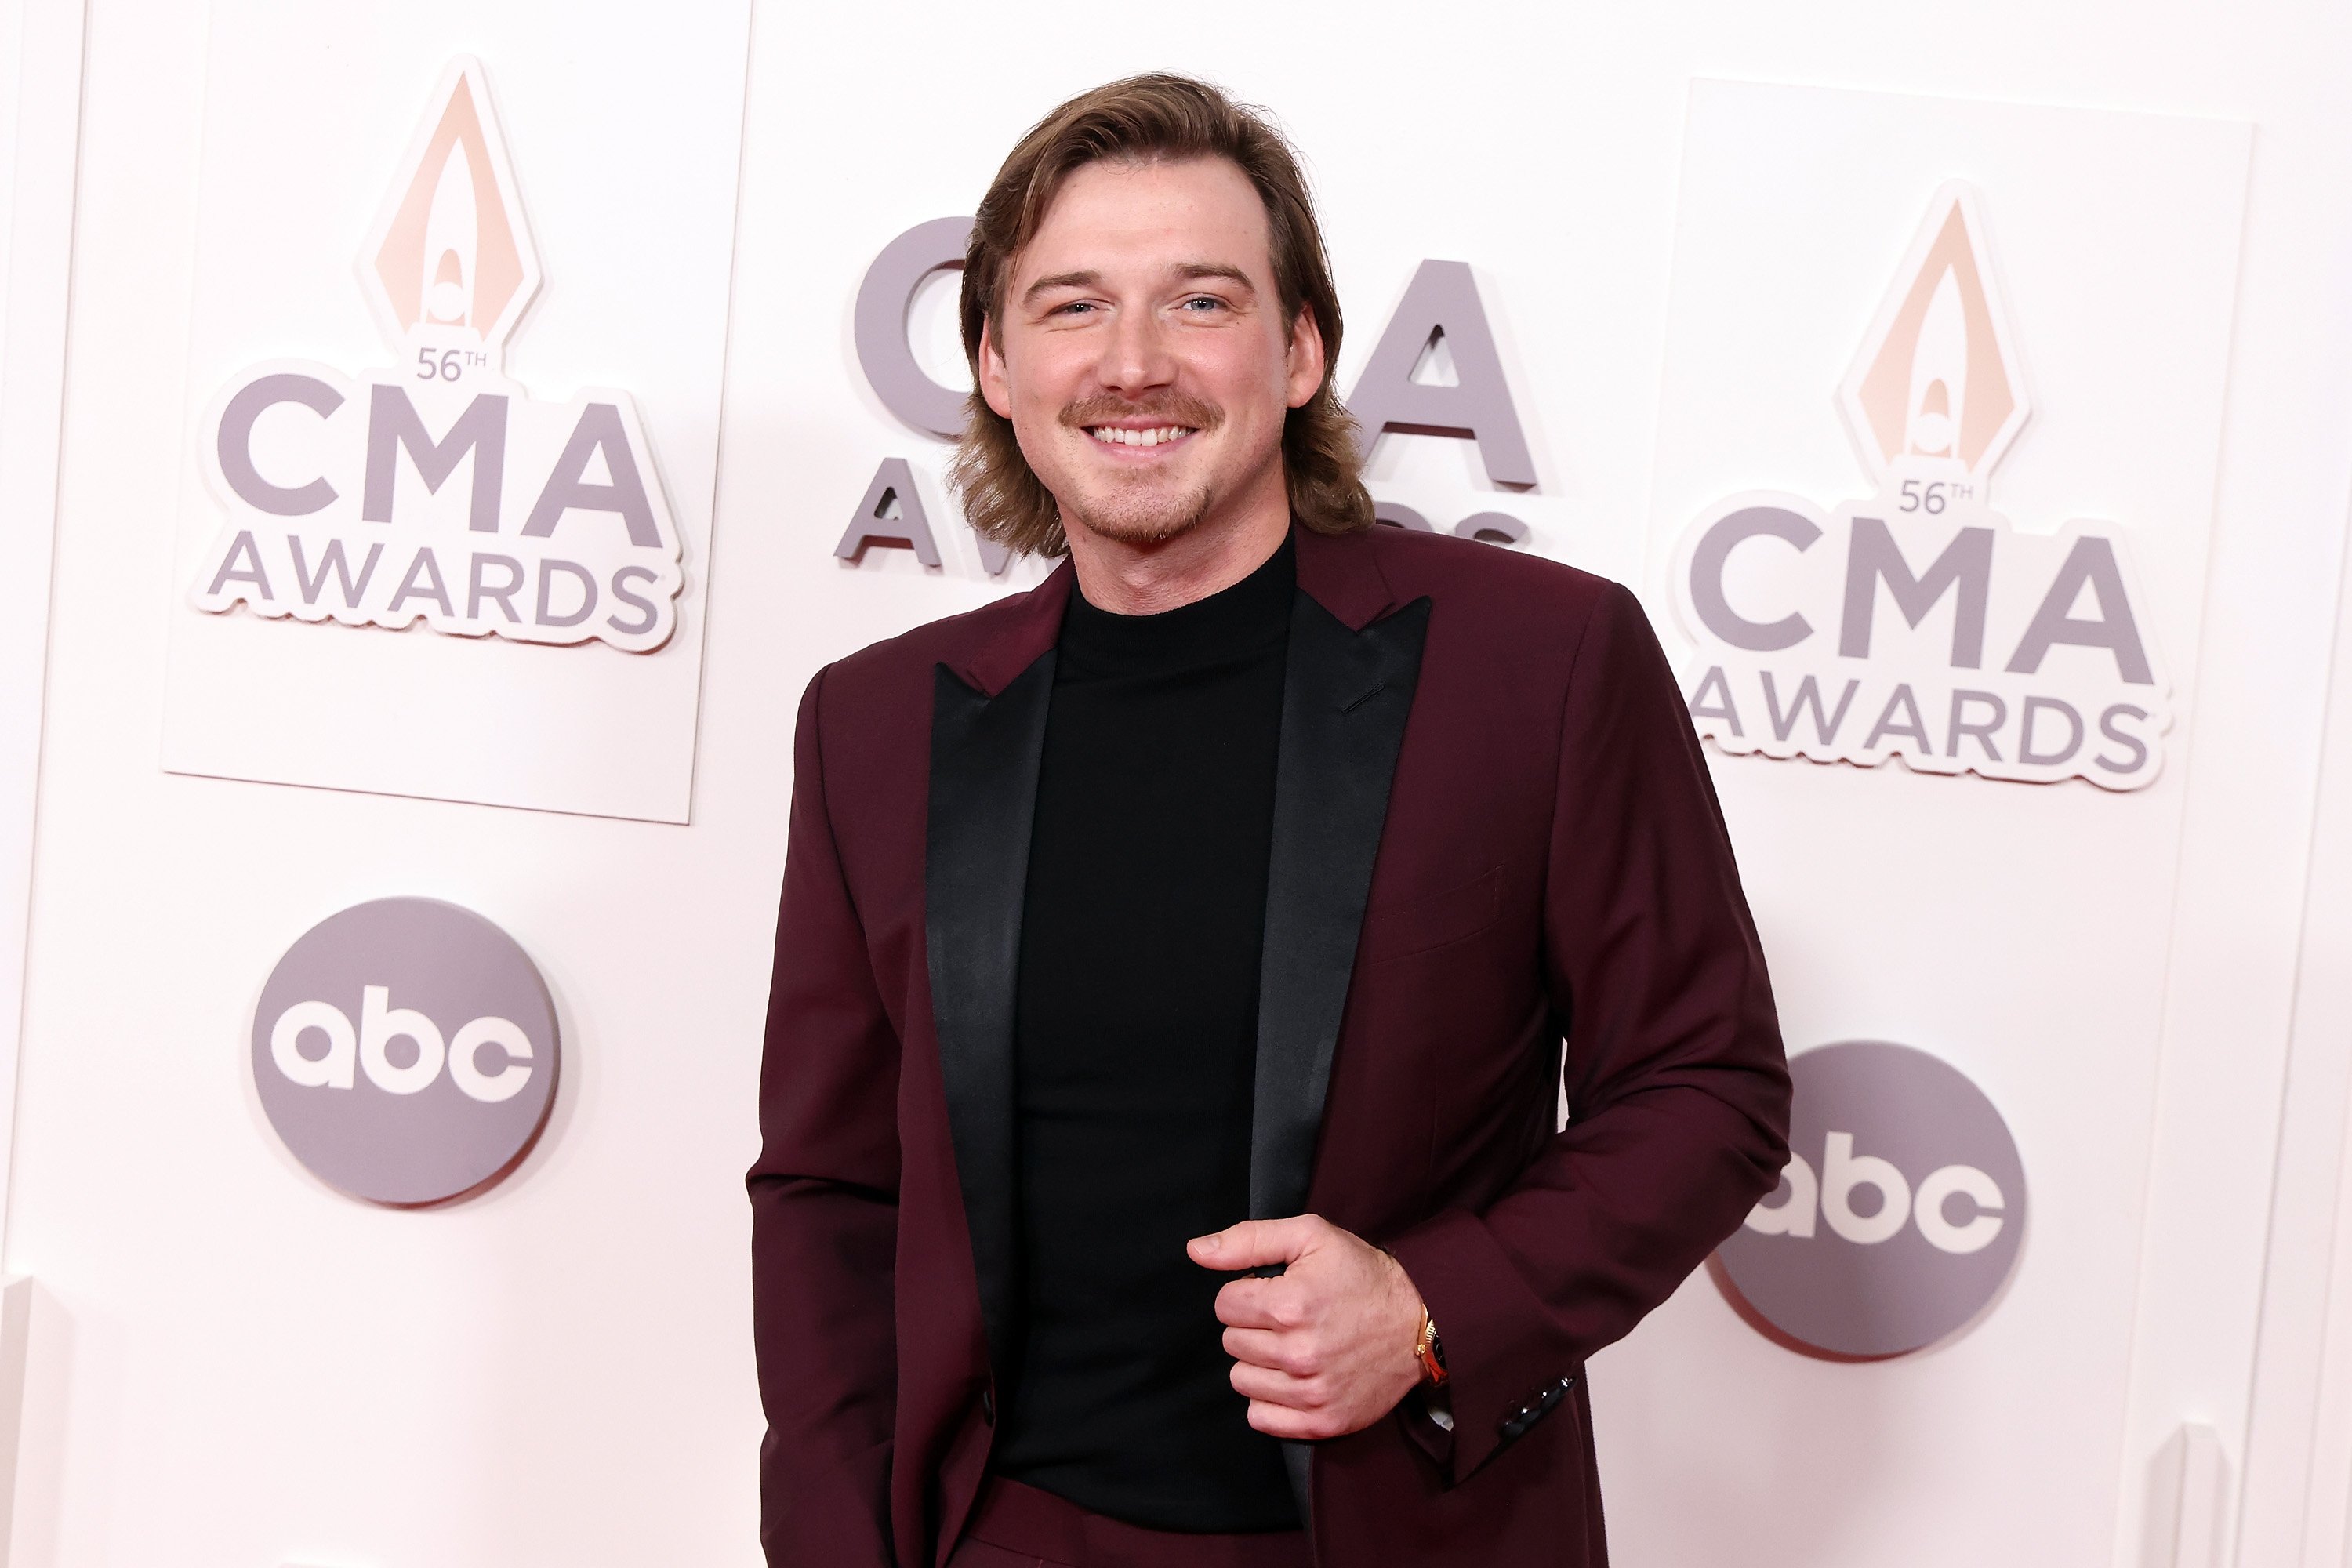 Morgan Wallen stands in front of a white backdrop that reads 'CMA Awards' and 'abc' while wearing a burgandy suit